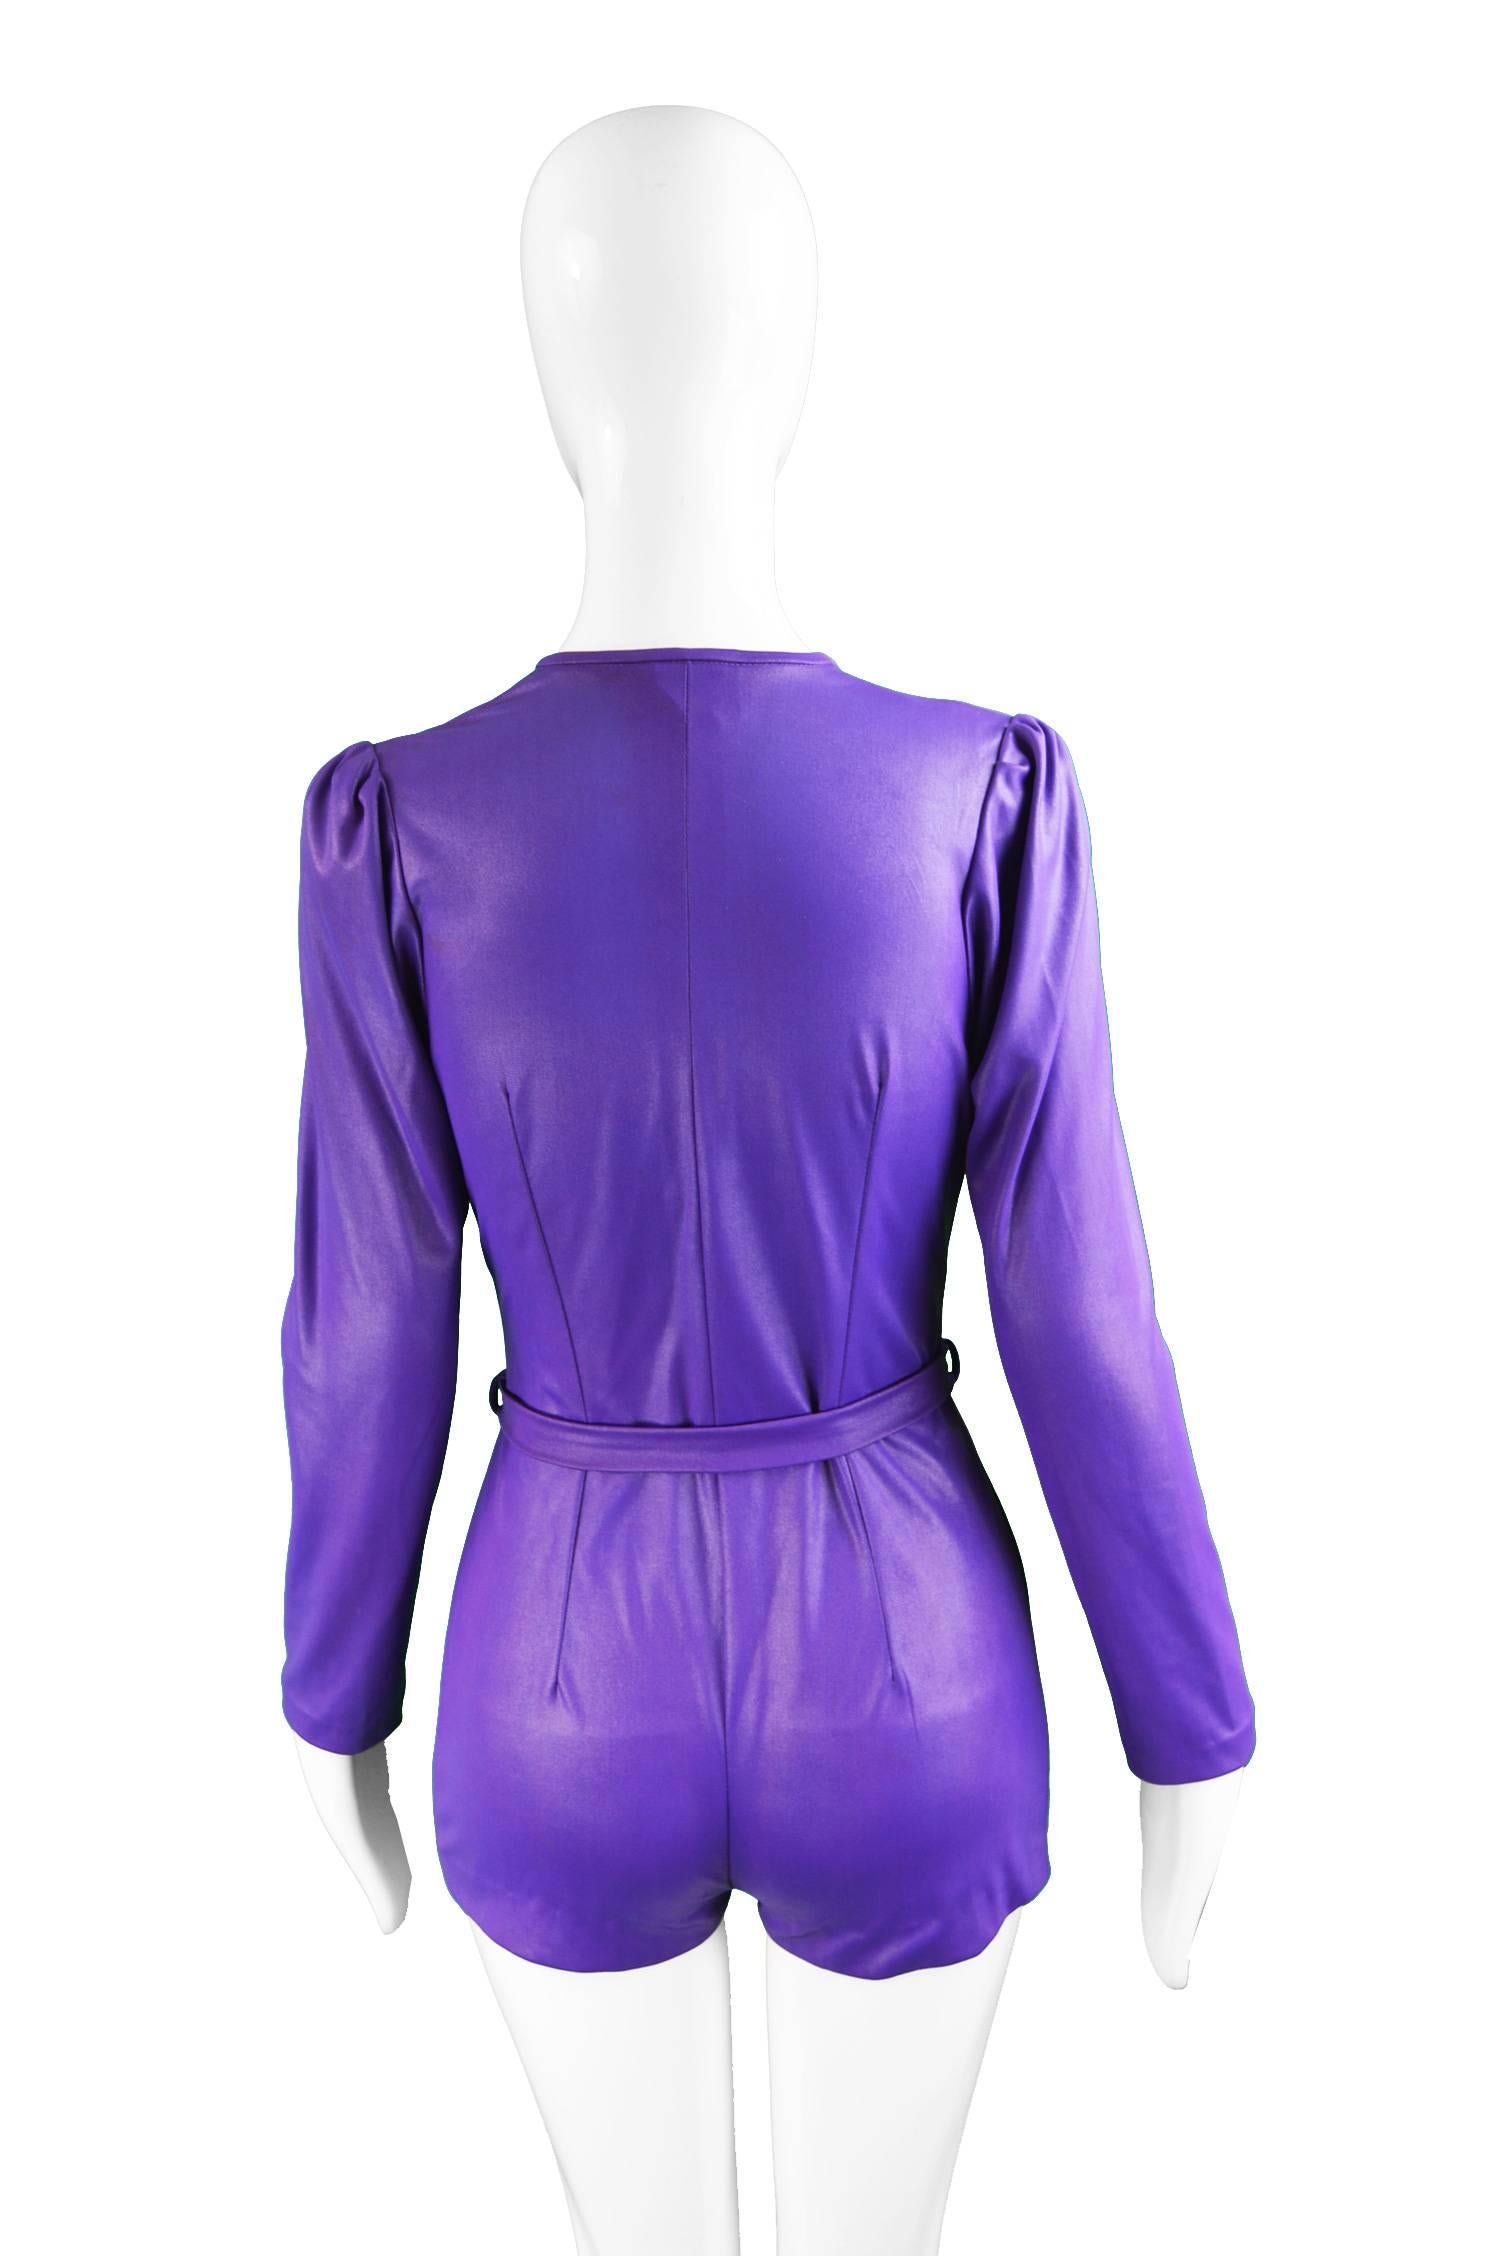 London Mob of Carnaby Street Purple Wet Look Playsuit, 1960s For Sale 1